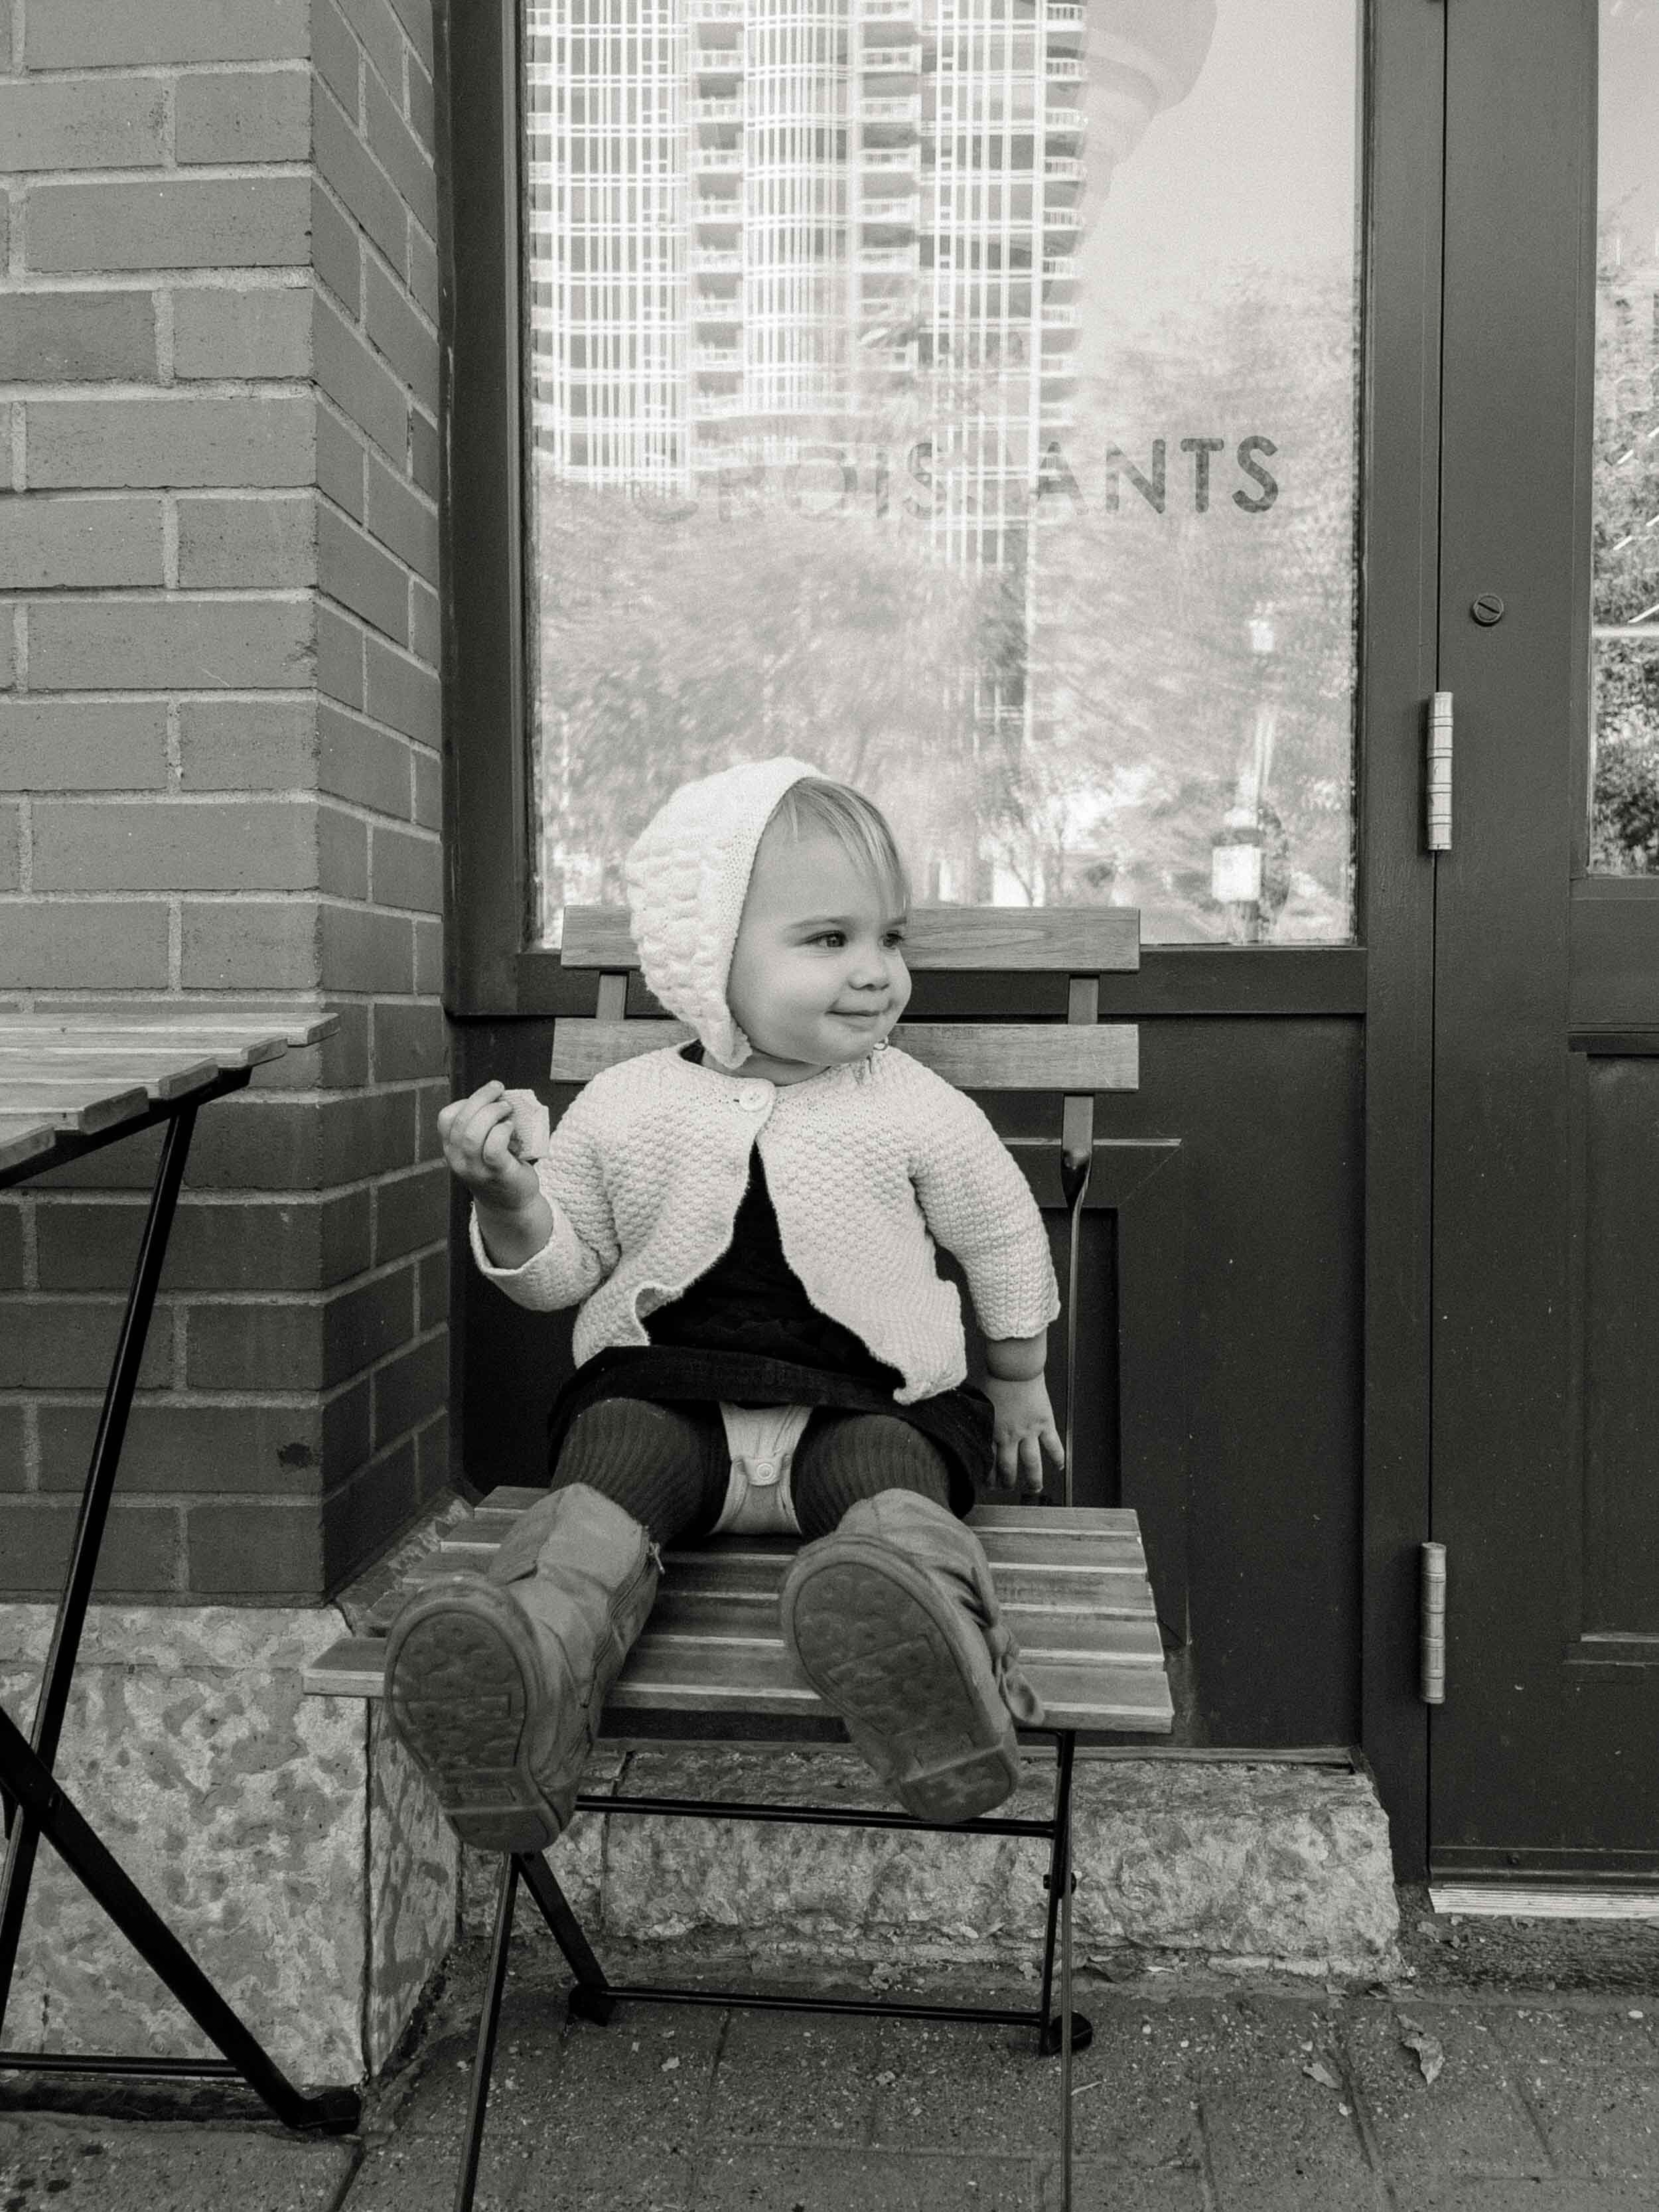 Downtown Calgary Fall Family Things to Do Prince's Island Park Black Sheep Pastry Jennie Guenard Photography